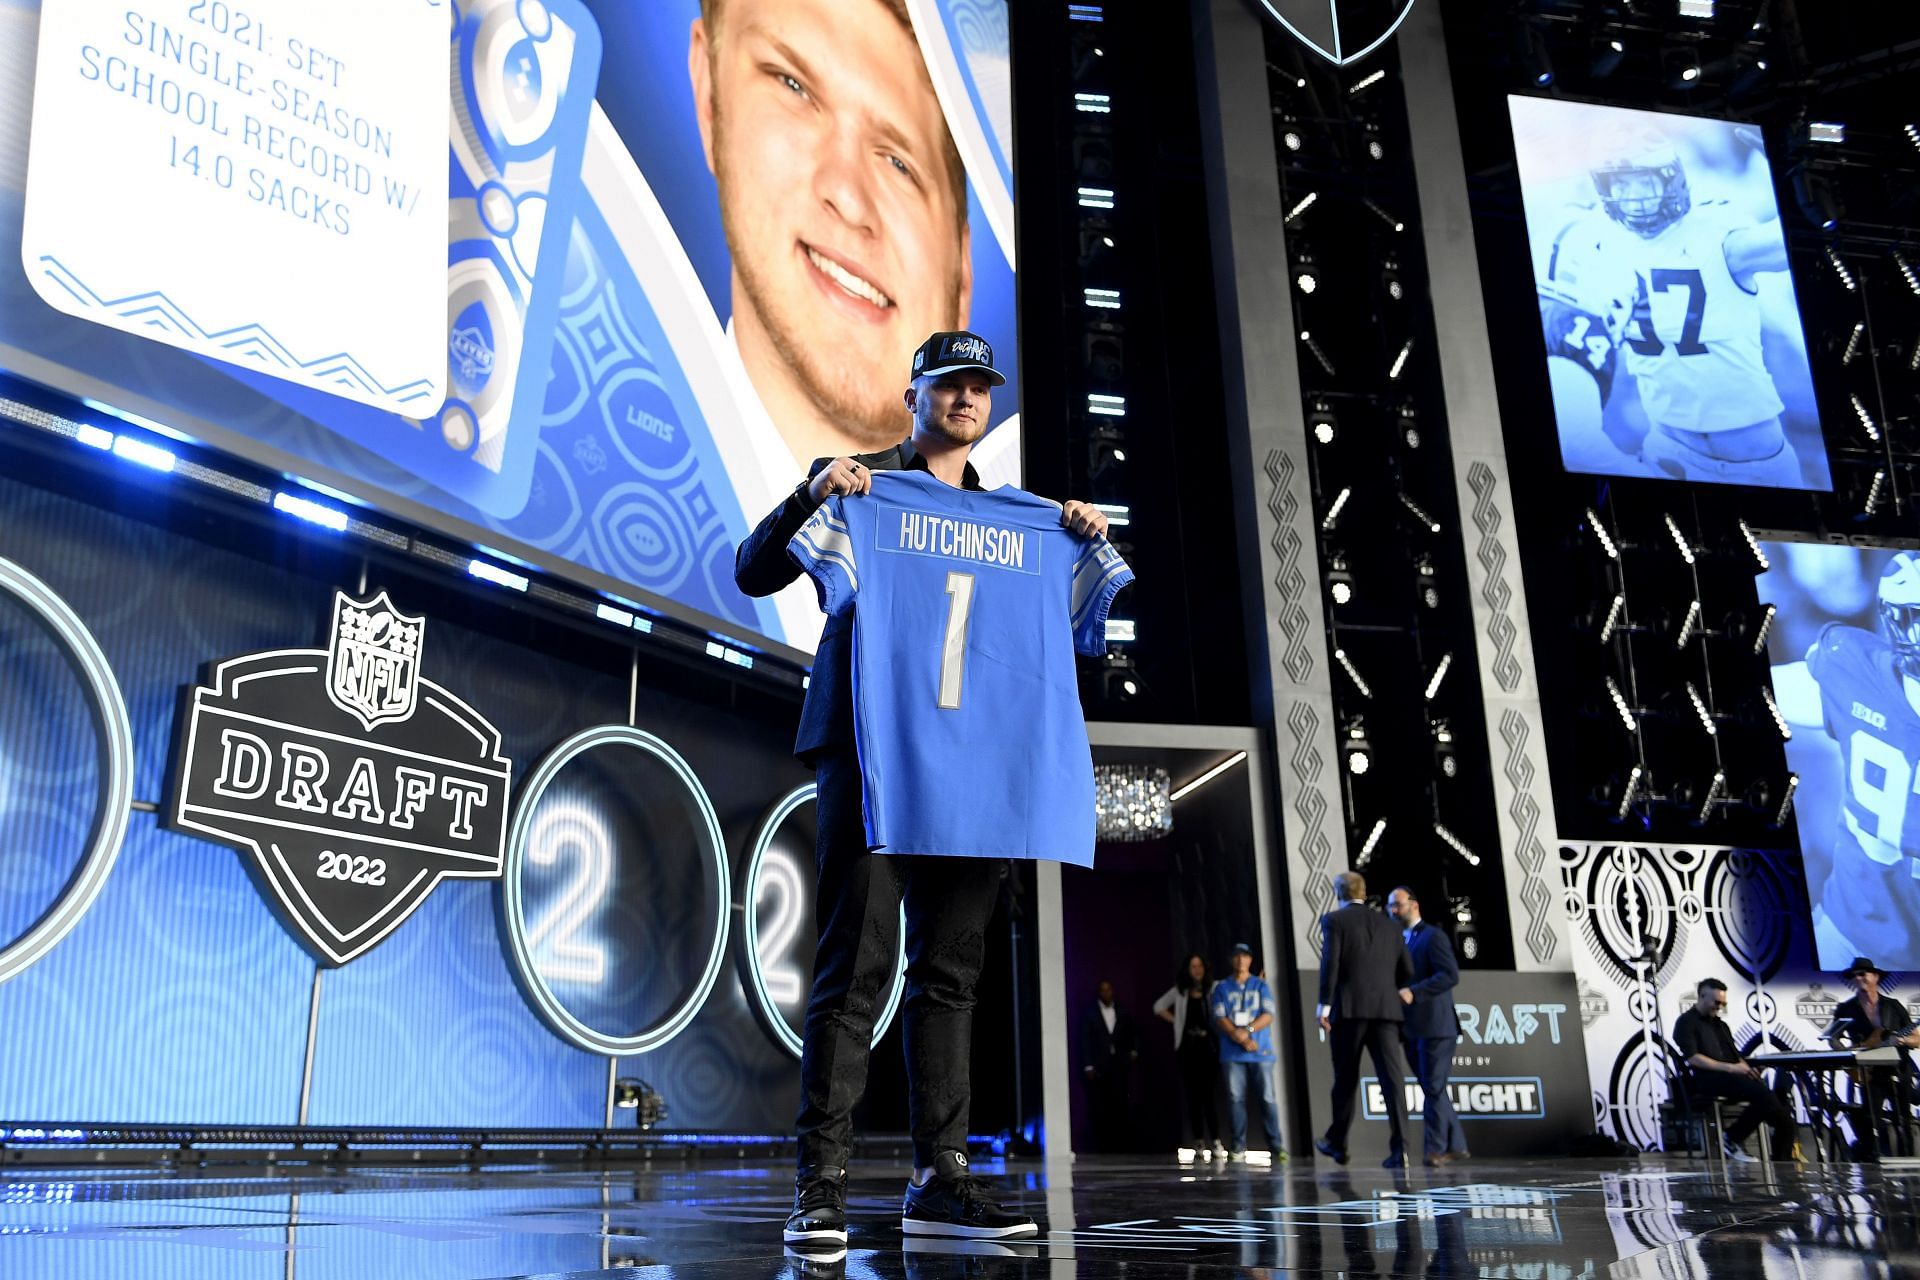 NFL draft 2023: Start time, draft order, how to watch and stream